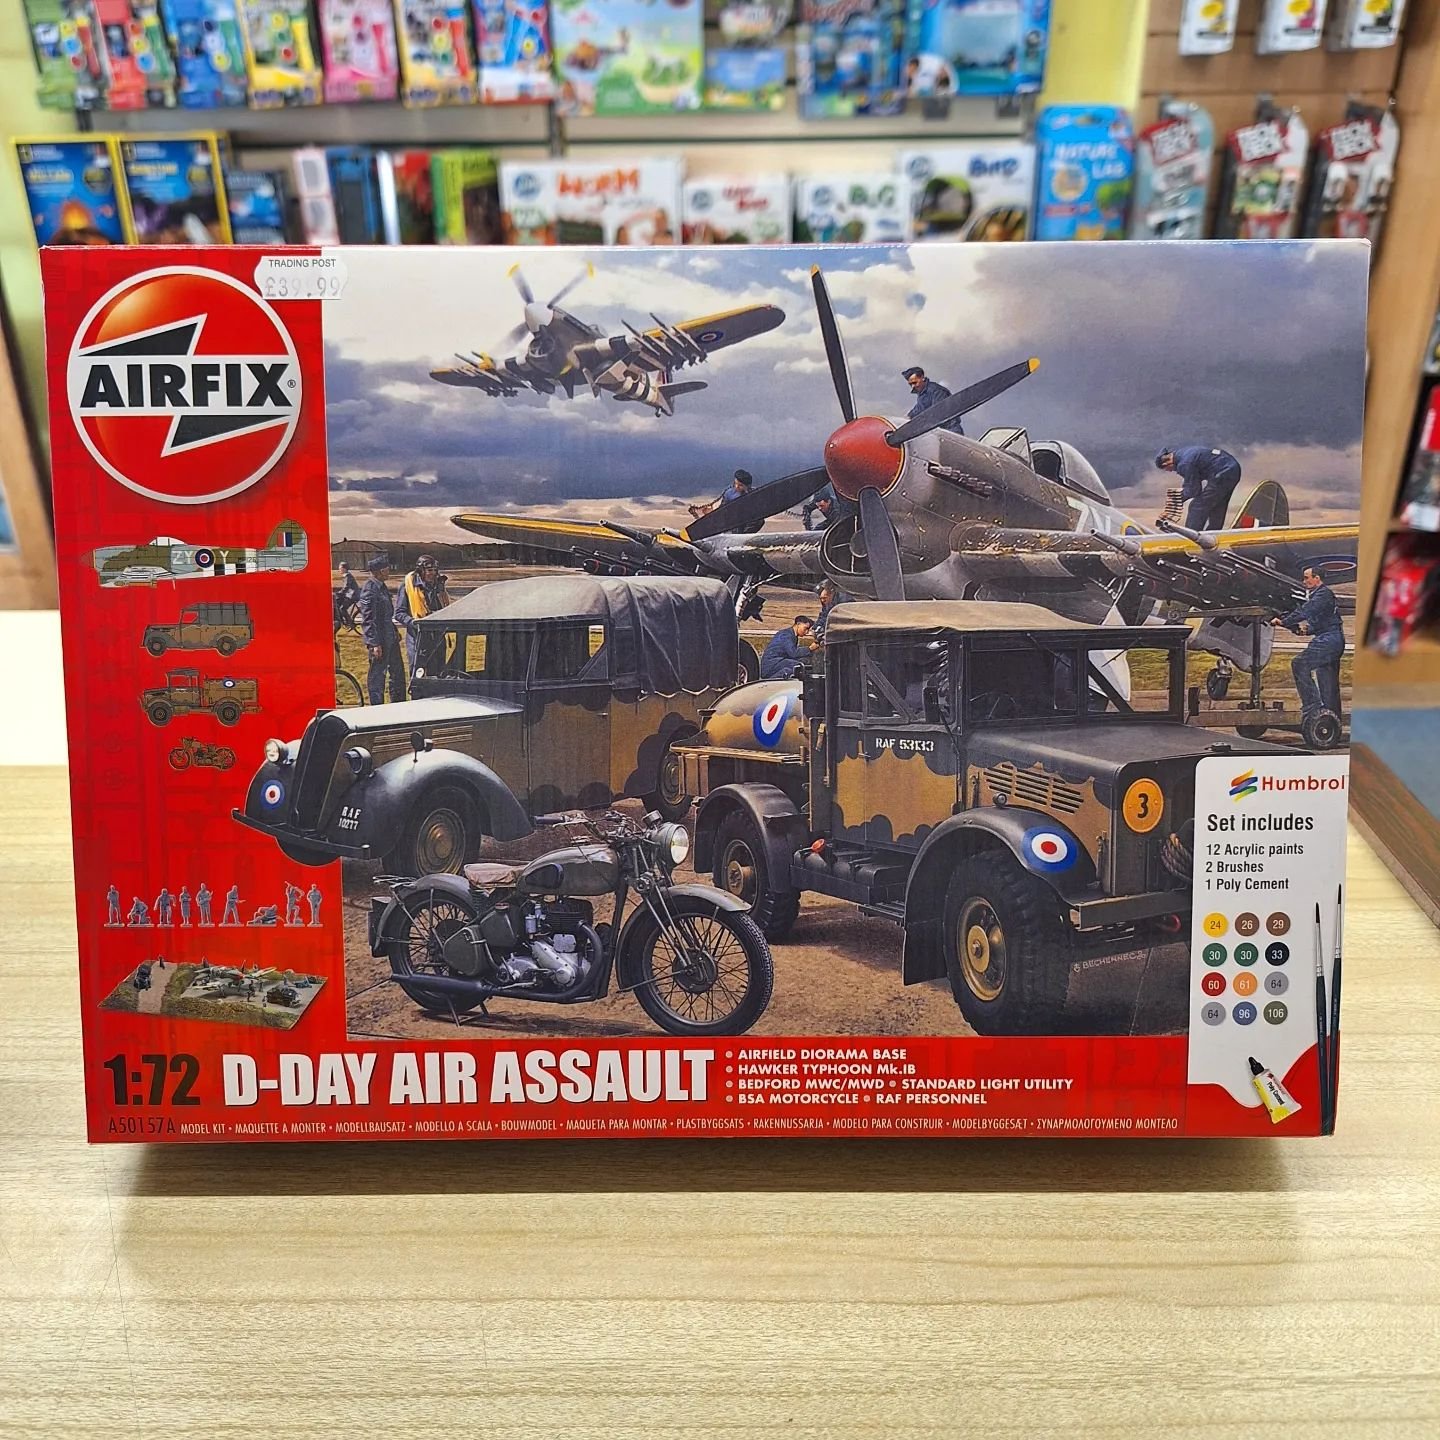 We've had an AIRFIX delivery.

You will find these 4 AIRFIX MODEL SETS &amp; more alongside our REVELL MODEL SETS and our range of model PAINTS, BRUSH, GLUE &amp; TOOLS!

#airfix #modelkits #revell #modelsets #craft #toyshop #kingsbridge #salcombe #d